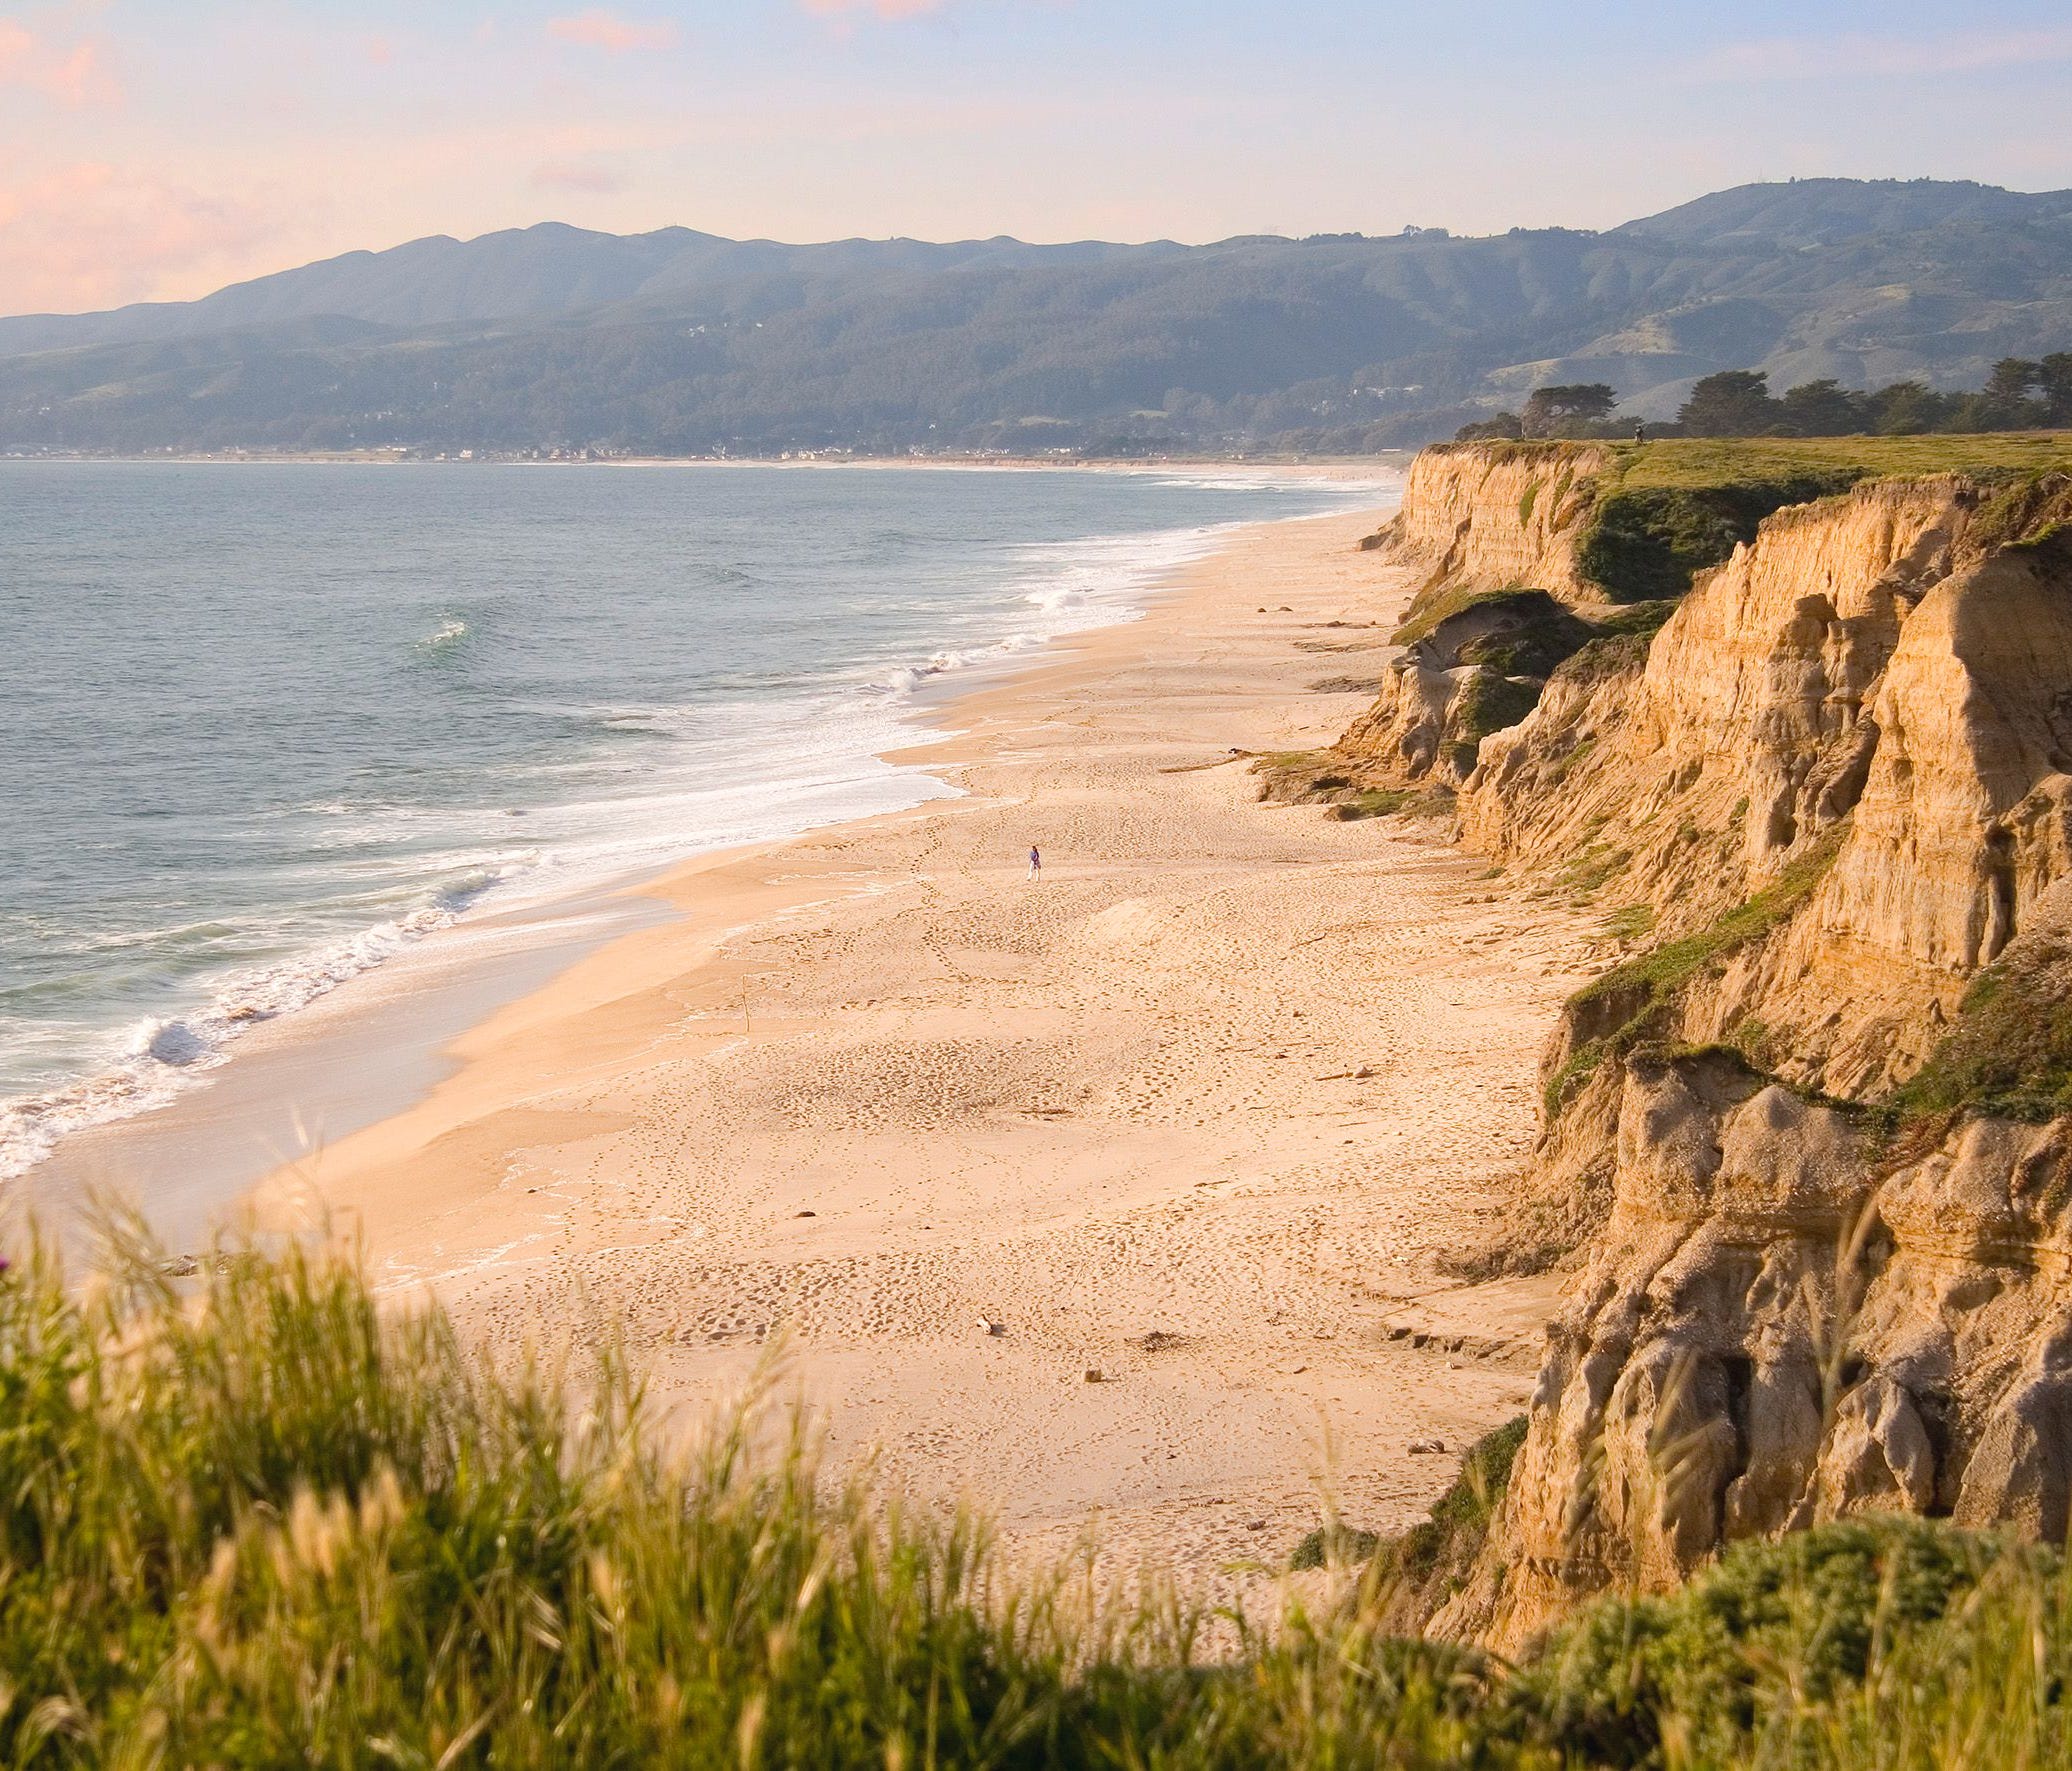 Montarra Beach in Half Moon Bay provides astonishing views of the Pacific Ocean from its dramatic, wind-swept cliffs.